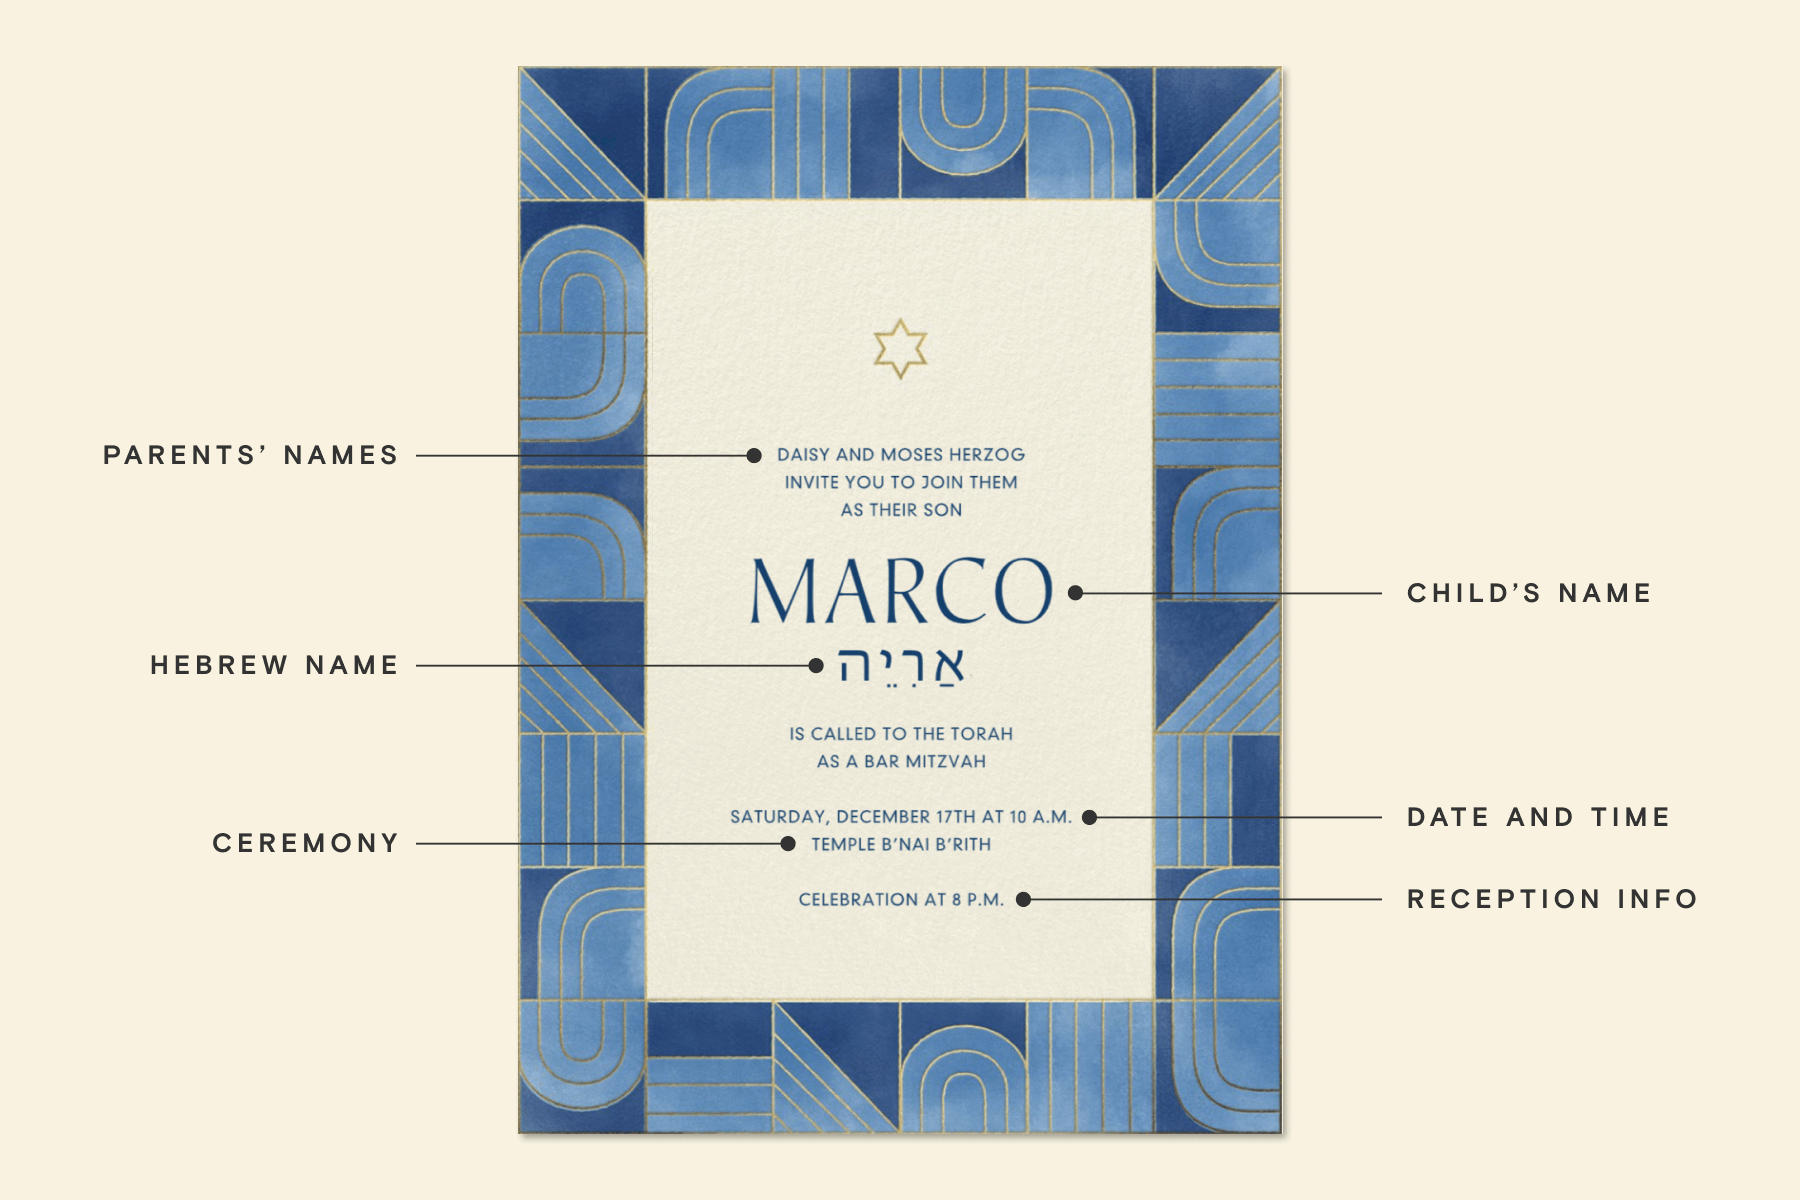 An invitation with a border of abstract curvy shapes in shades of blue with a small Star of David and event details labeled.